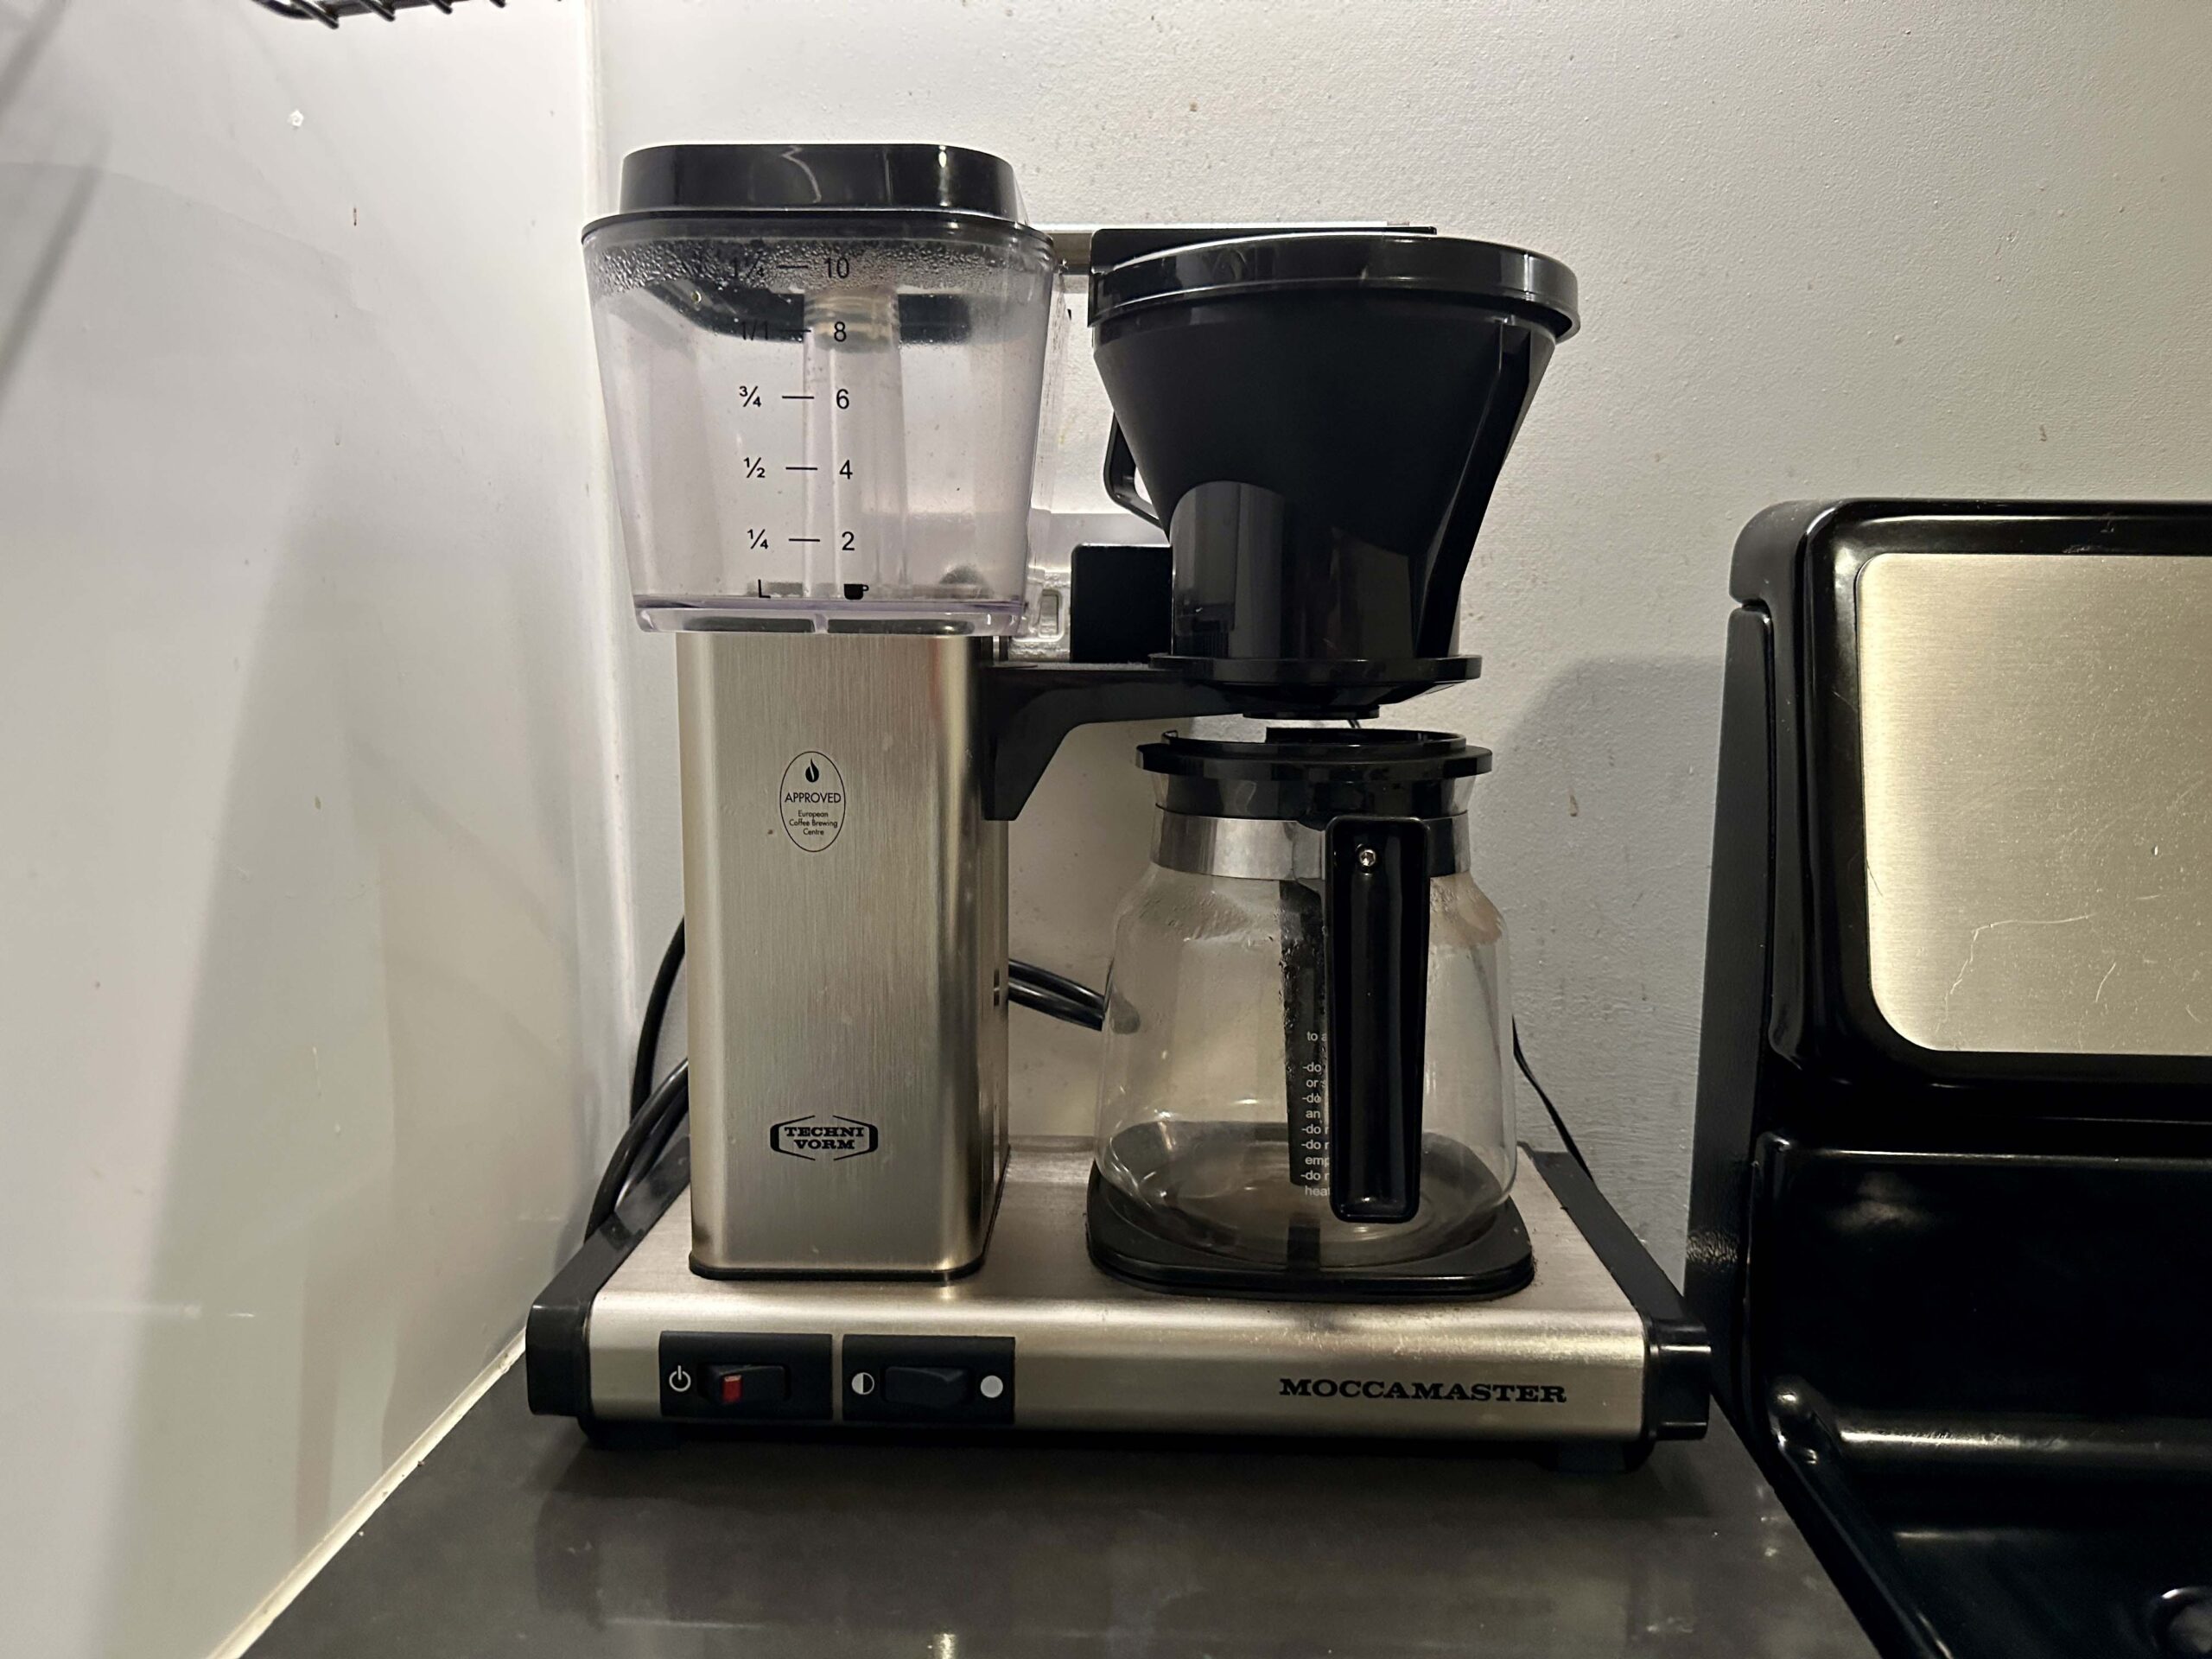 Battle Coffee Pot vs. Microwave: An Energy Cost Analysis